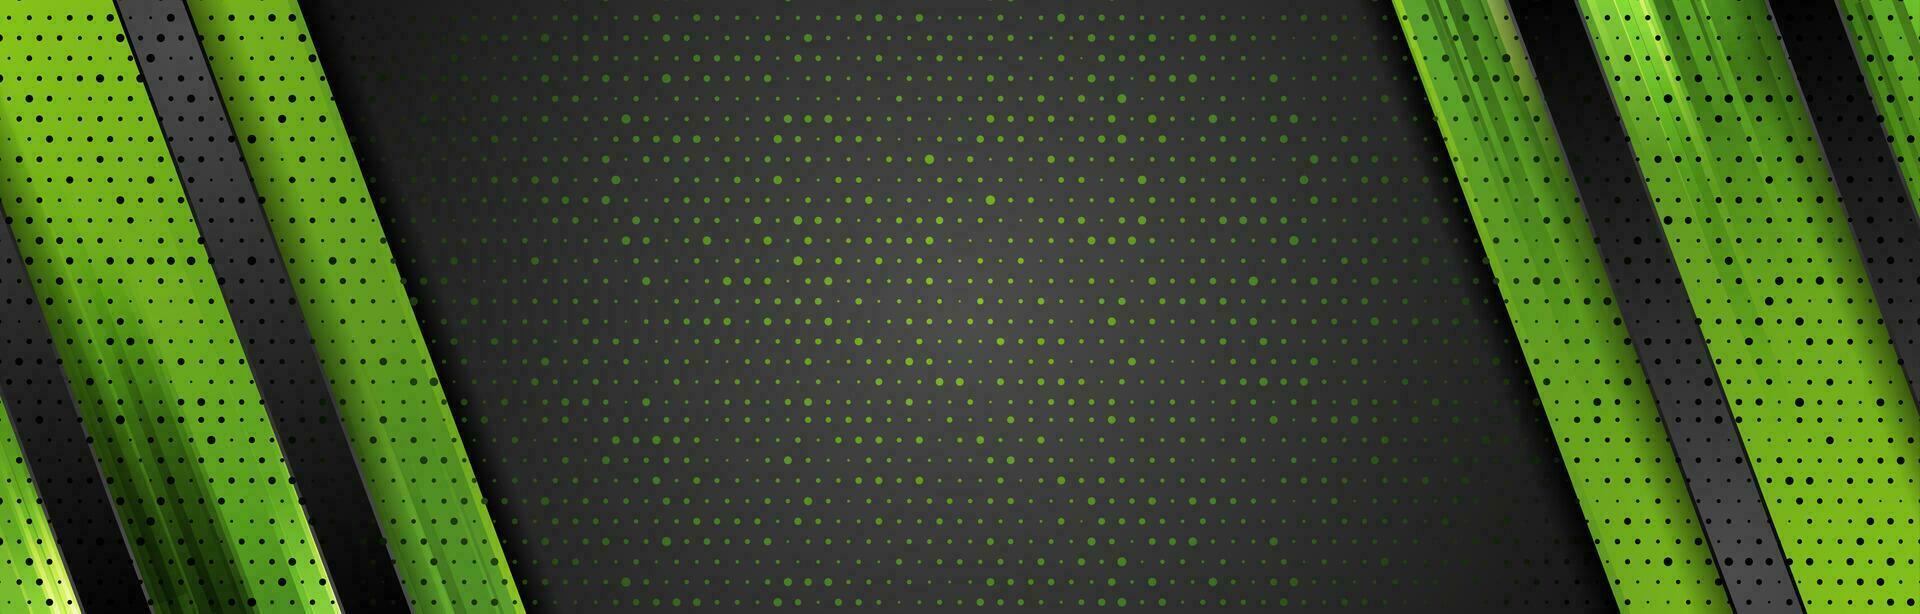 Black and green abstract corporate background vector